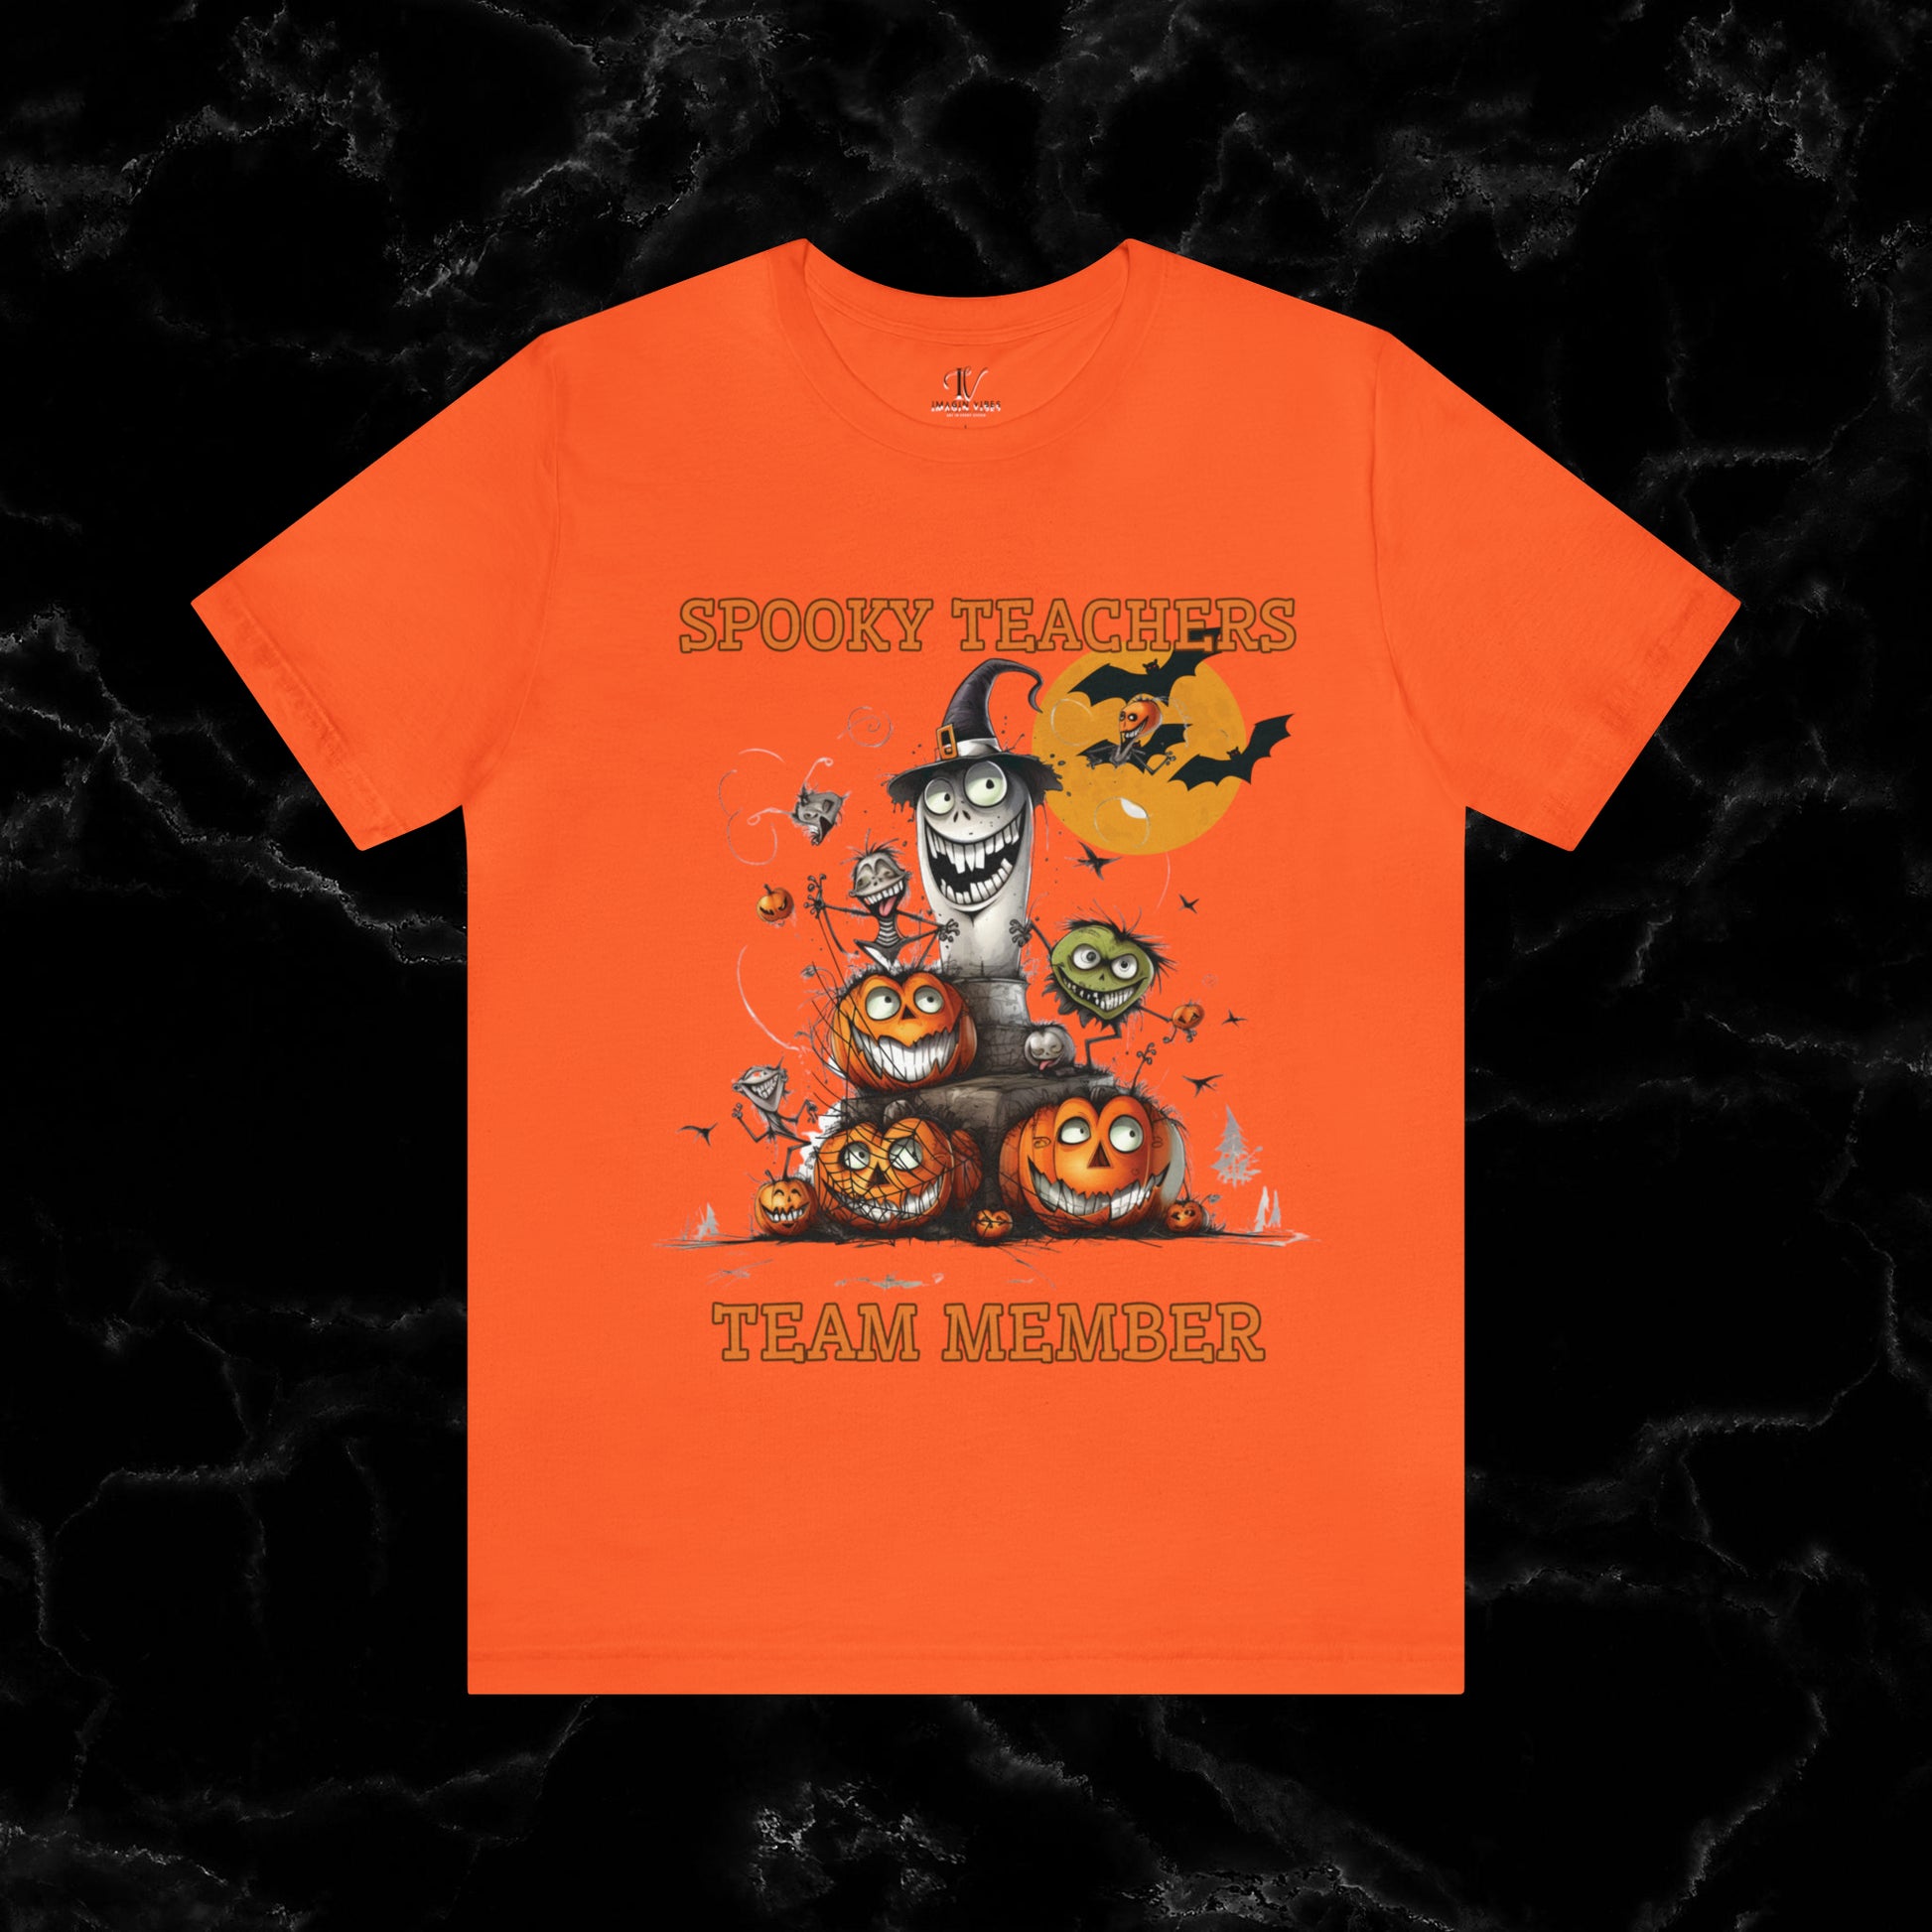 Spooky Teachers Team Member Unisex T-Shirt - Join the Fun with Halloween Vibes, Perfect for Educators Embracing the Spooky Spirit T-Shirt   